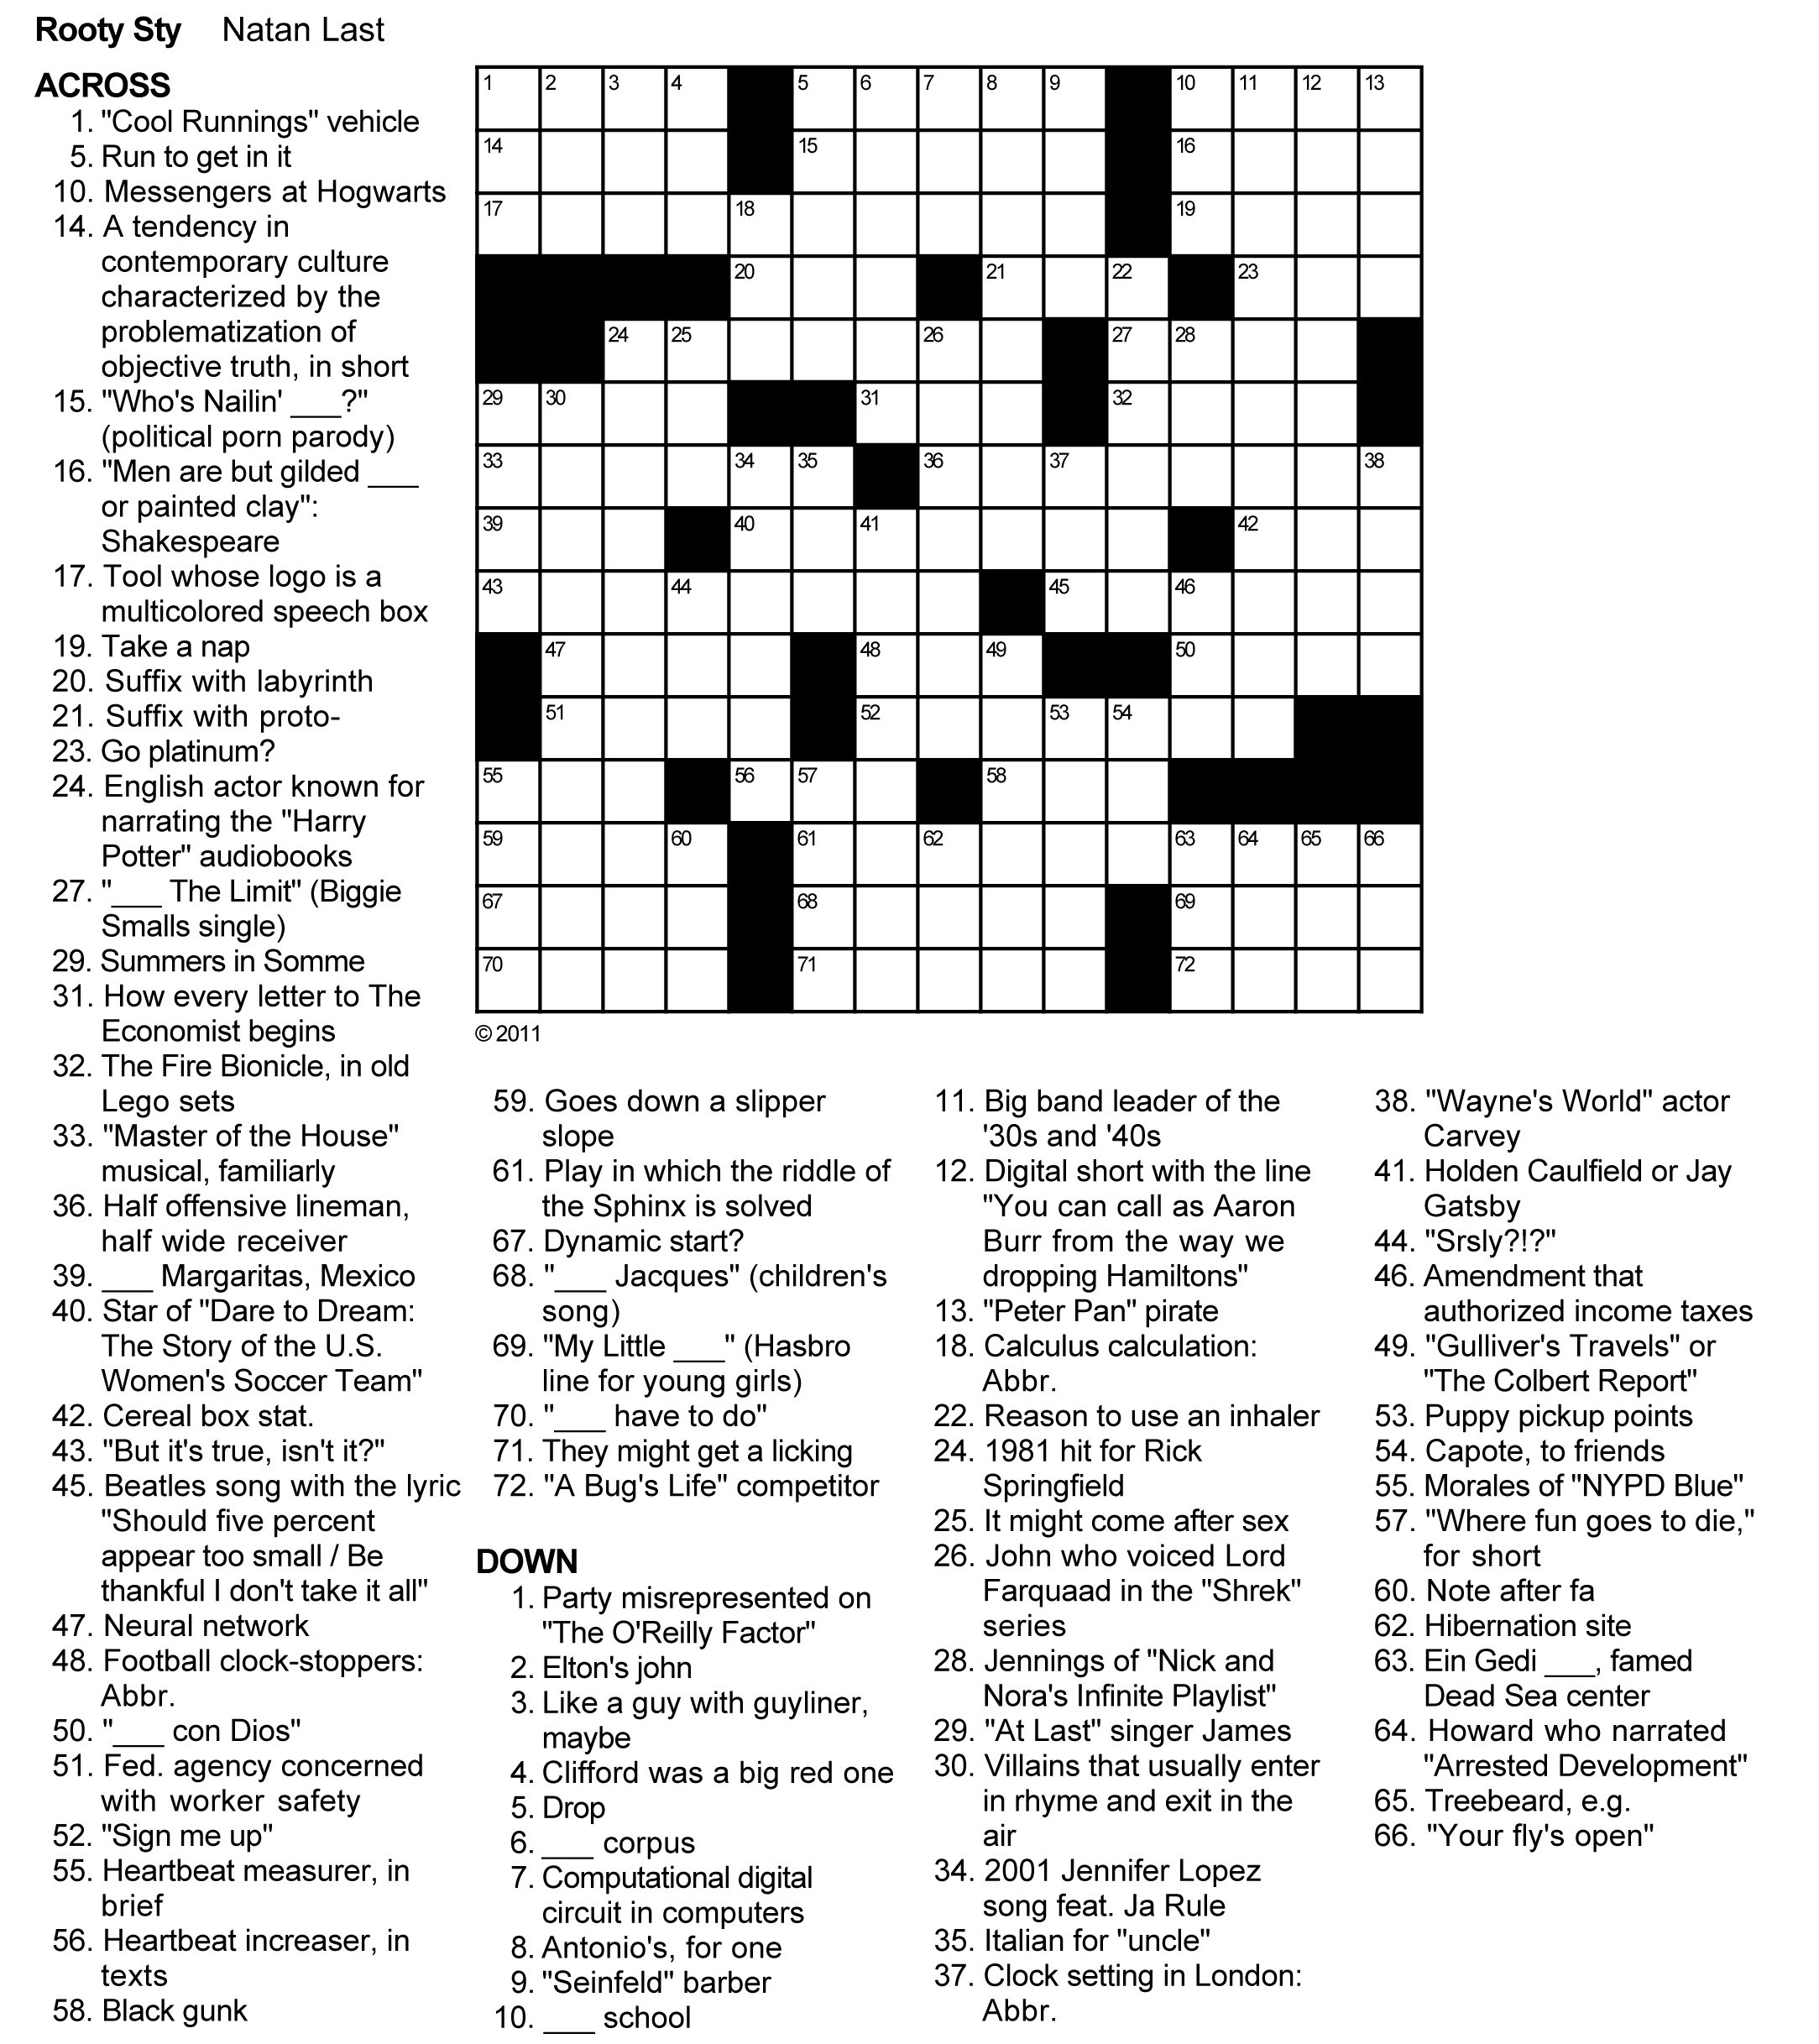 Daily Crossword Puzzle Printable – Jowo - Free Daily Printable - Free Daily Printable Crossword Puzzles